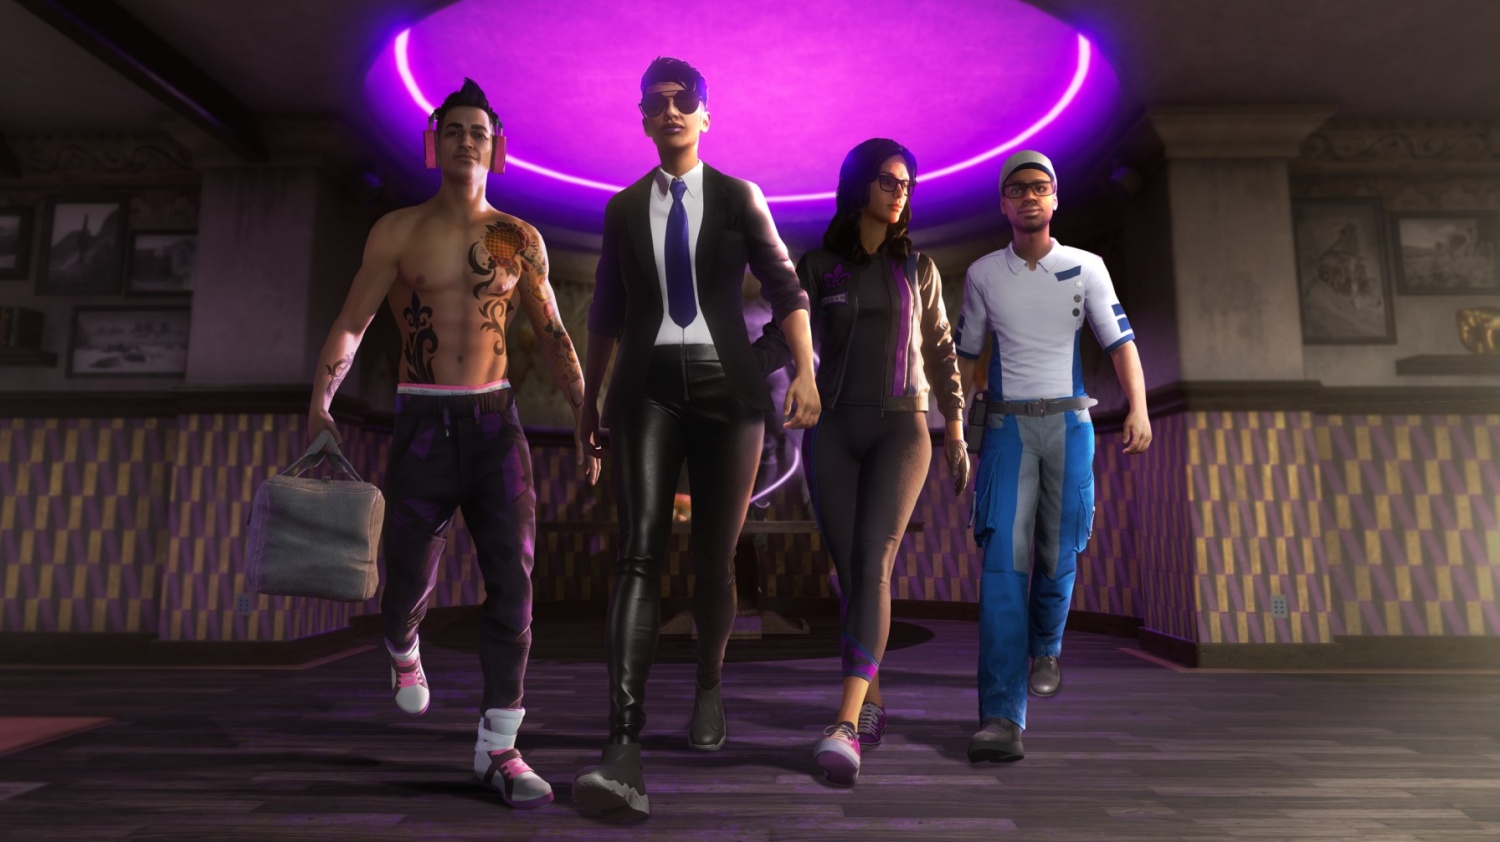 'Saints Row' Gets New DLC Called The Heist & The Hazardous: Helicopter, Weapons, Rewards, Cosmetics, and More